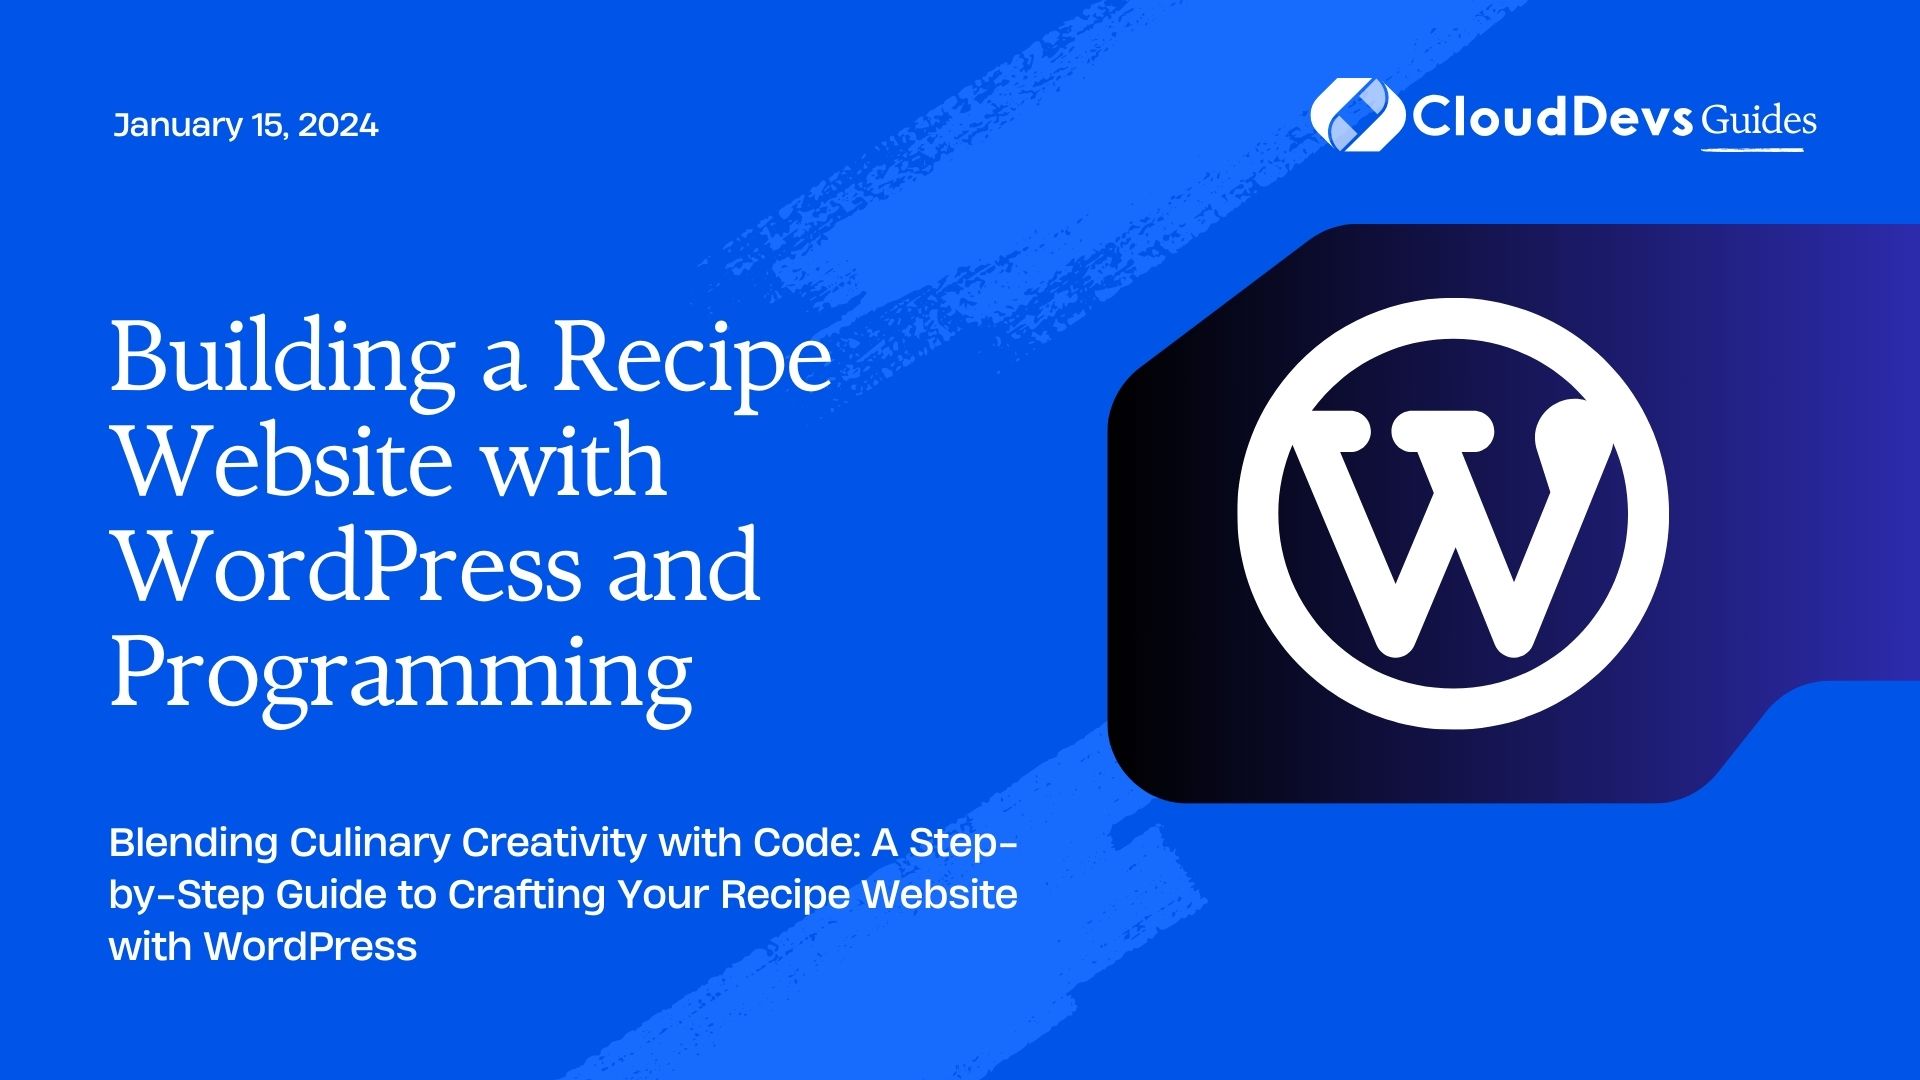 Building a Recipe Website with WordPress and Programming